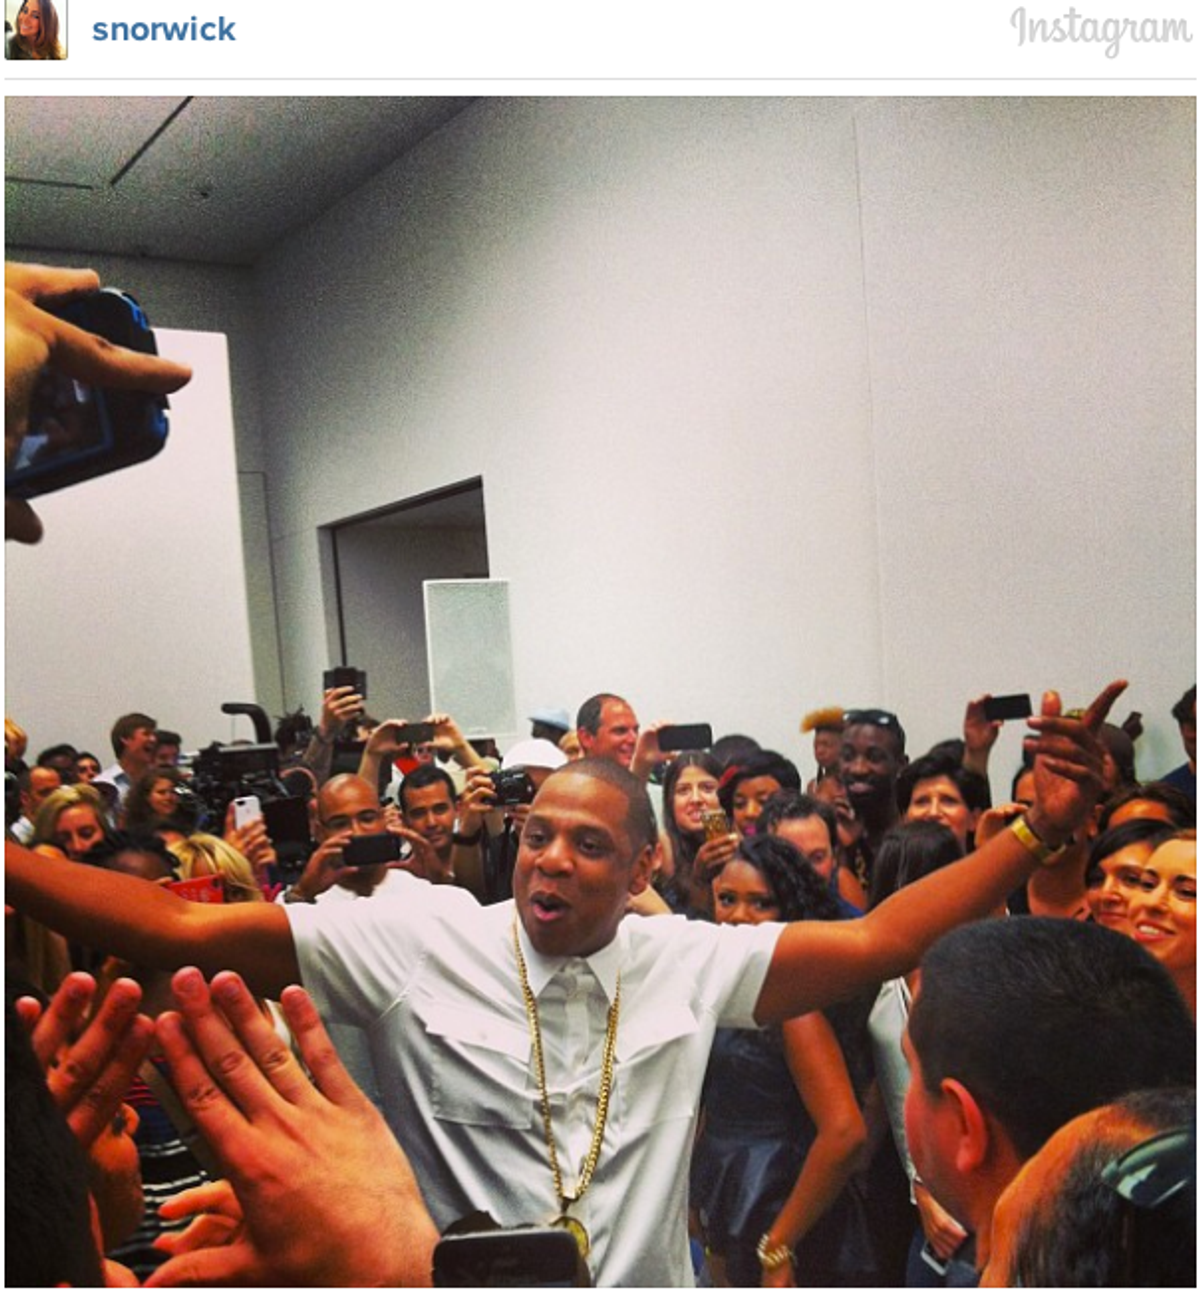  Jay-Z films video for "Picasso Baby" at Pace Gallery in NYC  (Instagram)